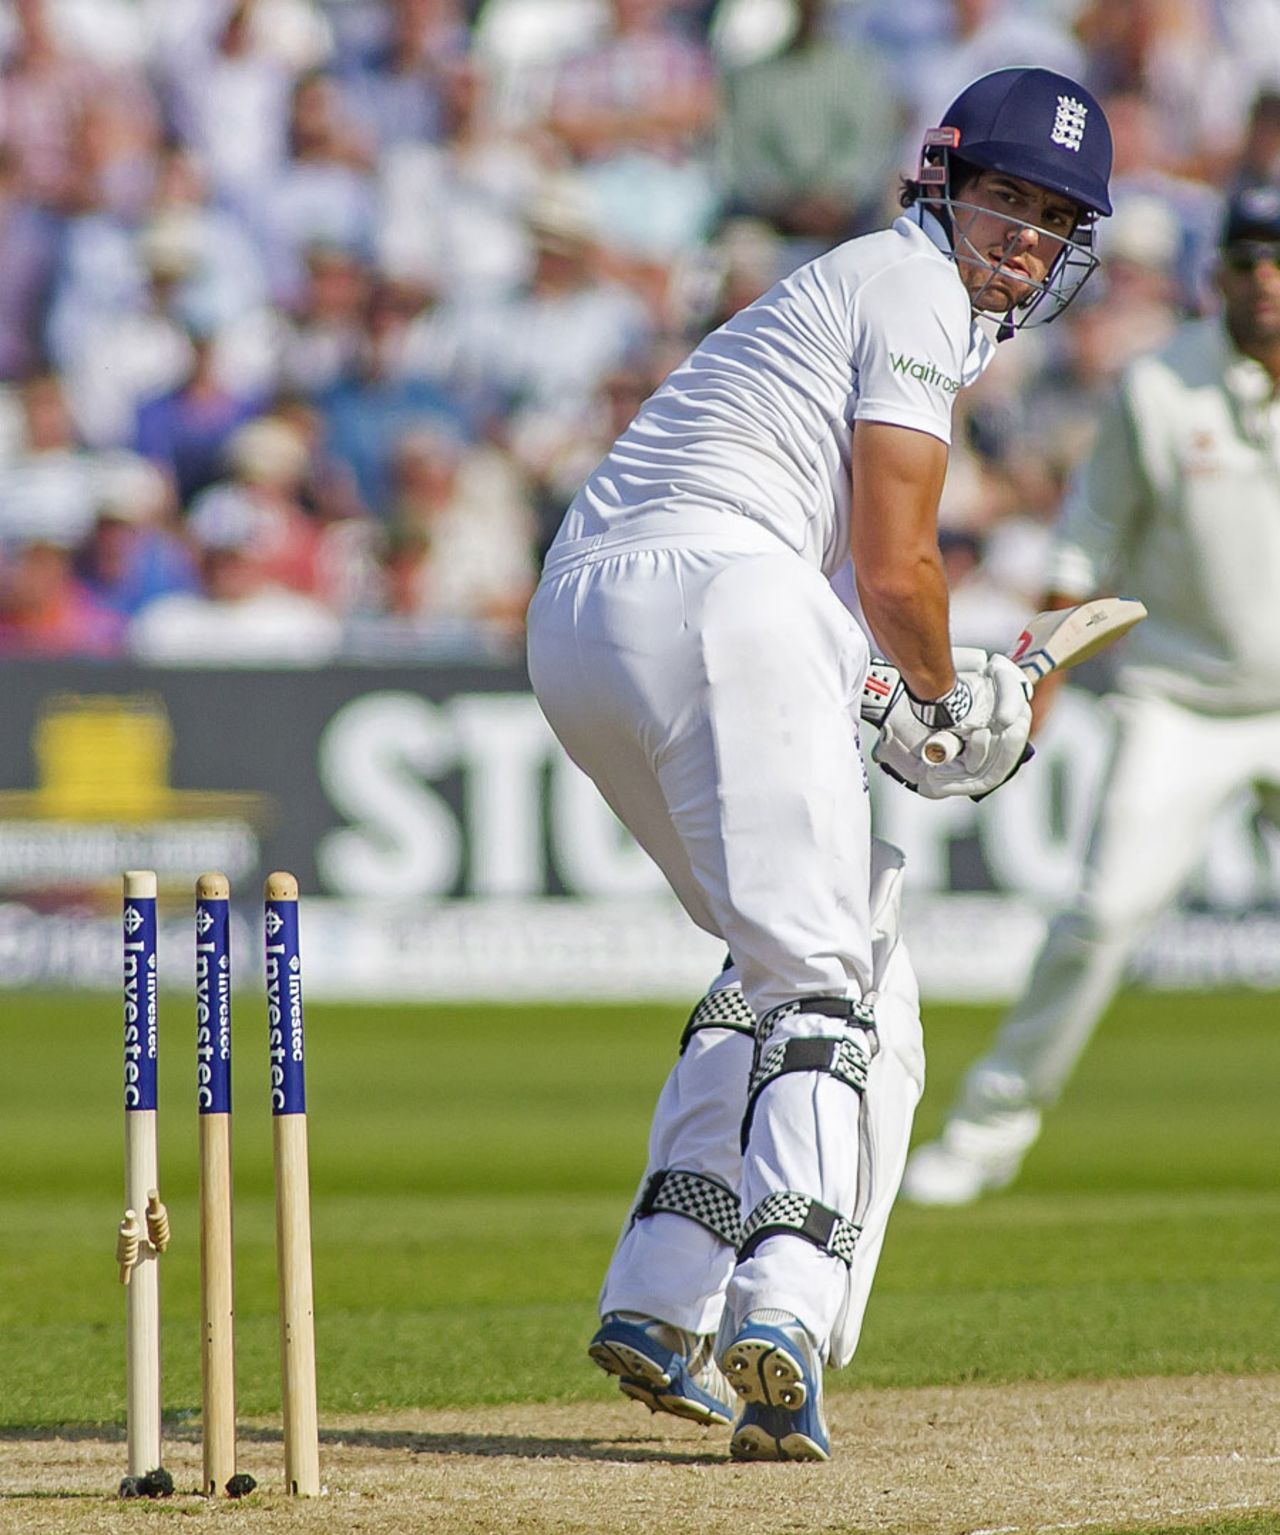 Alastair Cook turns around just in time to see his bails hit the ground, England v India, 1st Investec Test, Trent Bridge, 2nd day, July 10, 2014